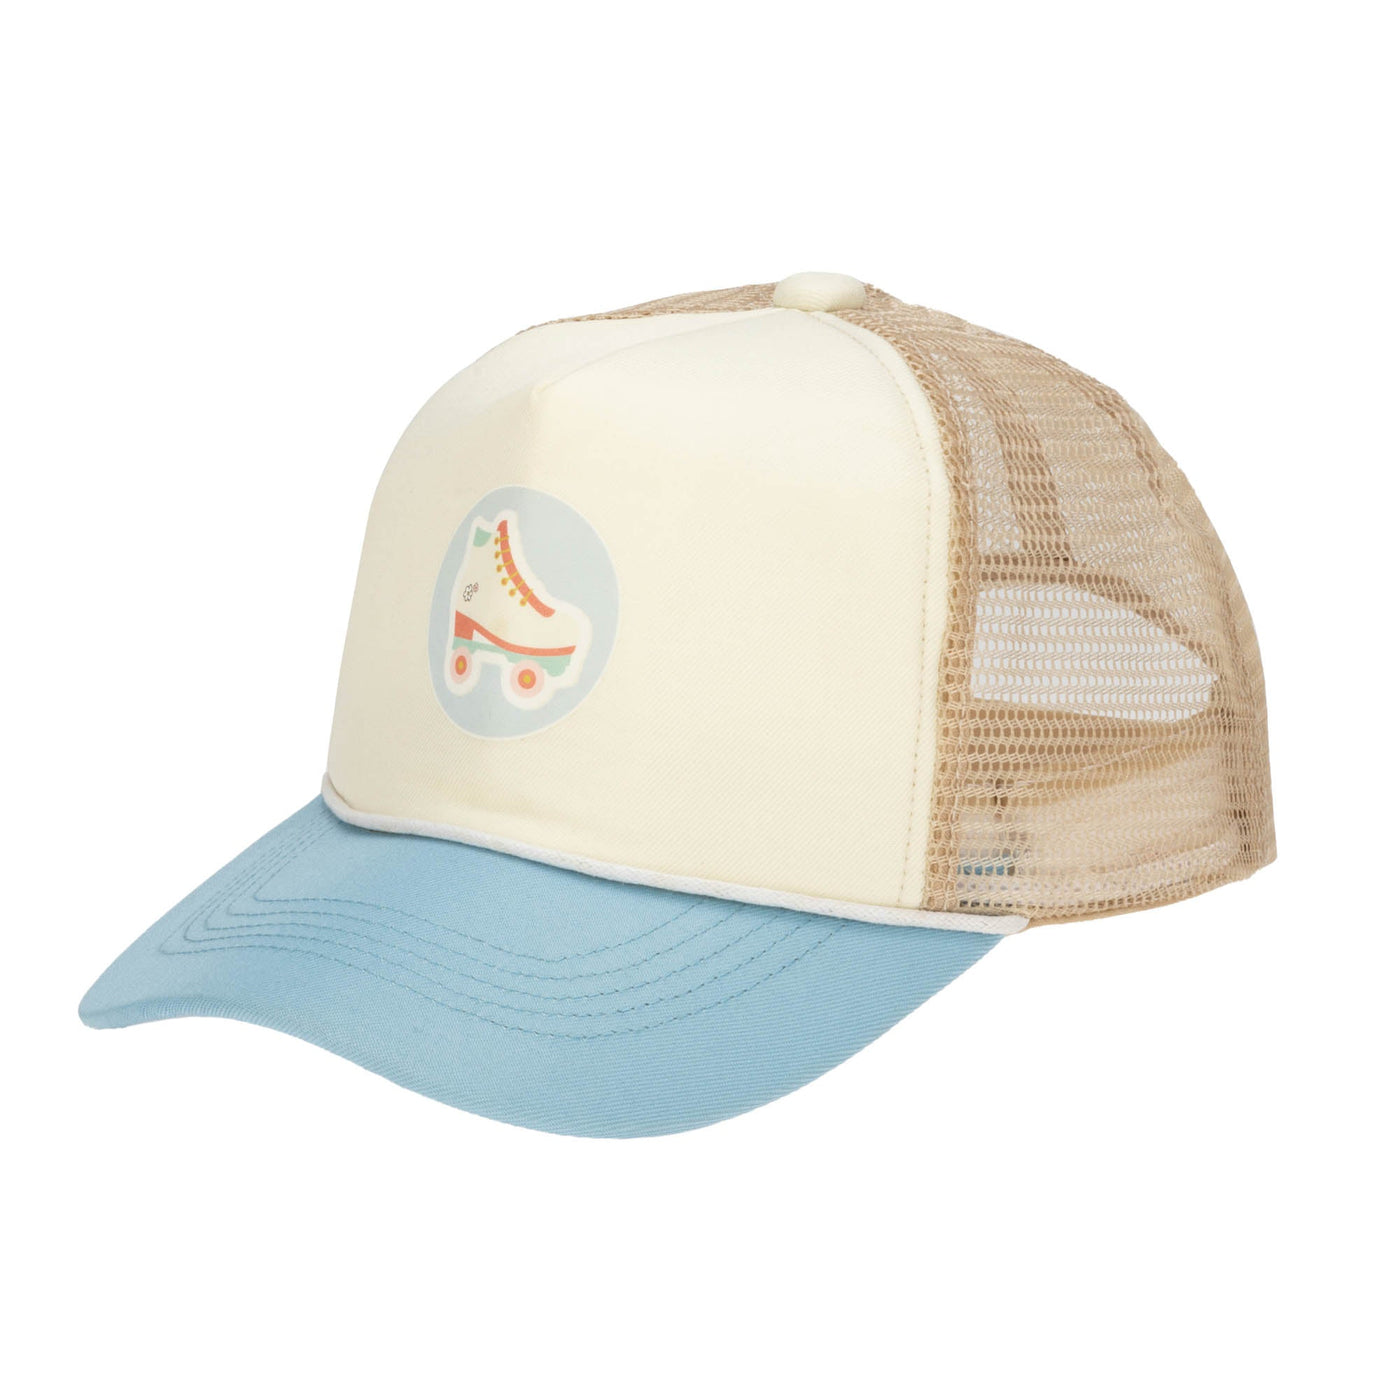 Trucker - Cut And Sew Trucker Hat With Roller-skate Graphic